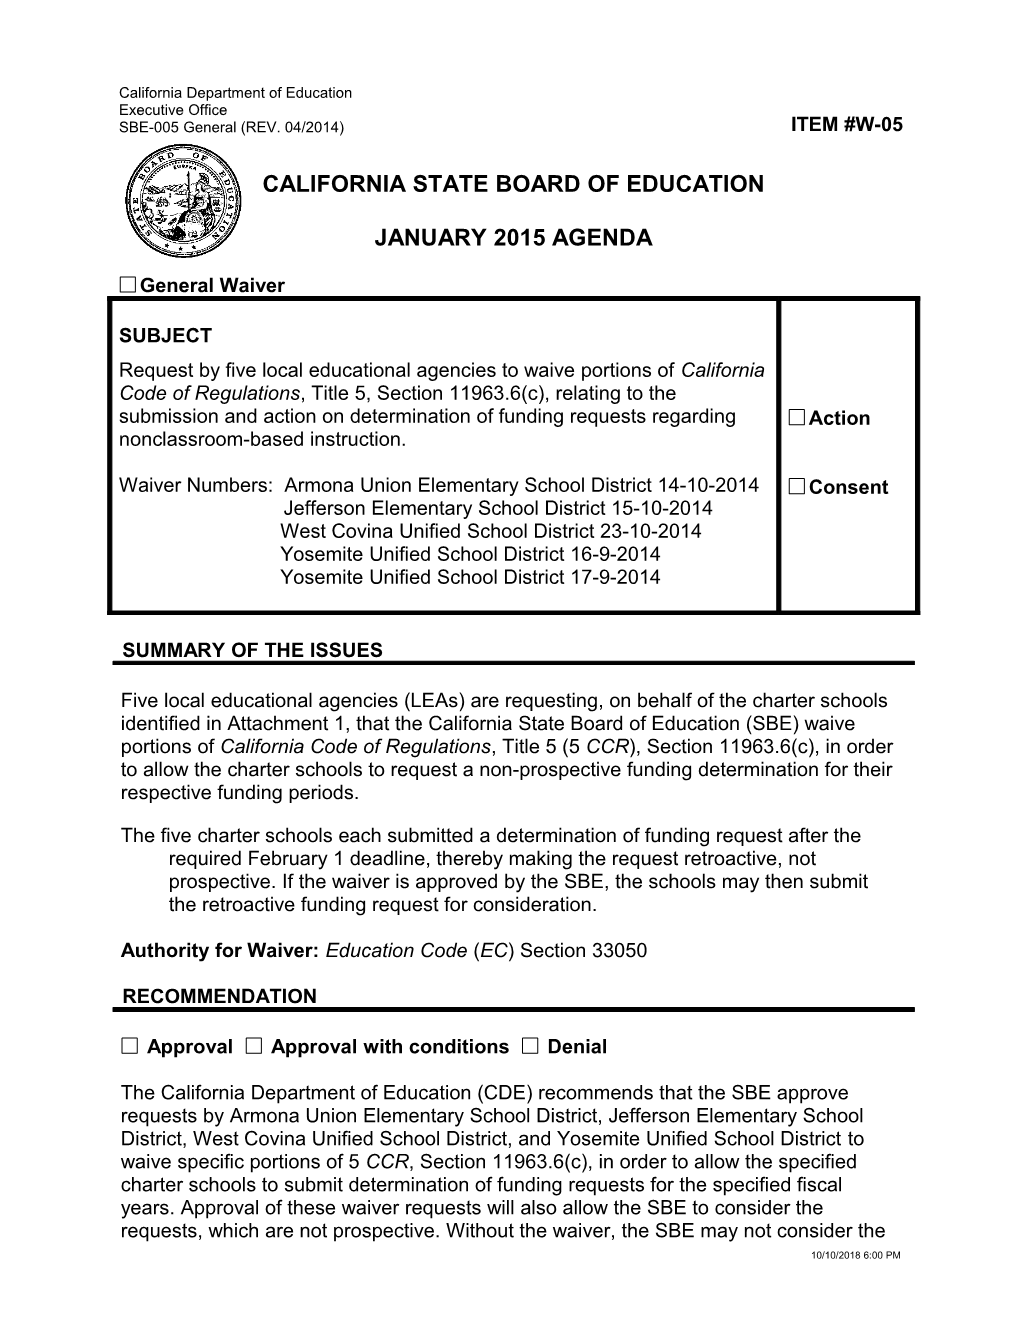 January 2015 Waiver Item W-05 - Meeting Agendas (CA State Board of Education)